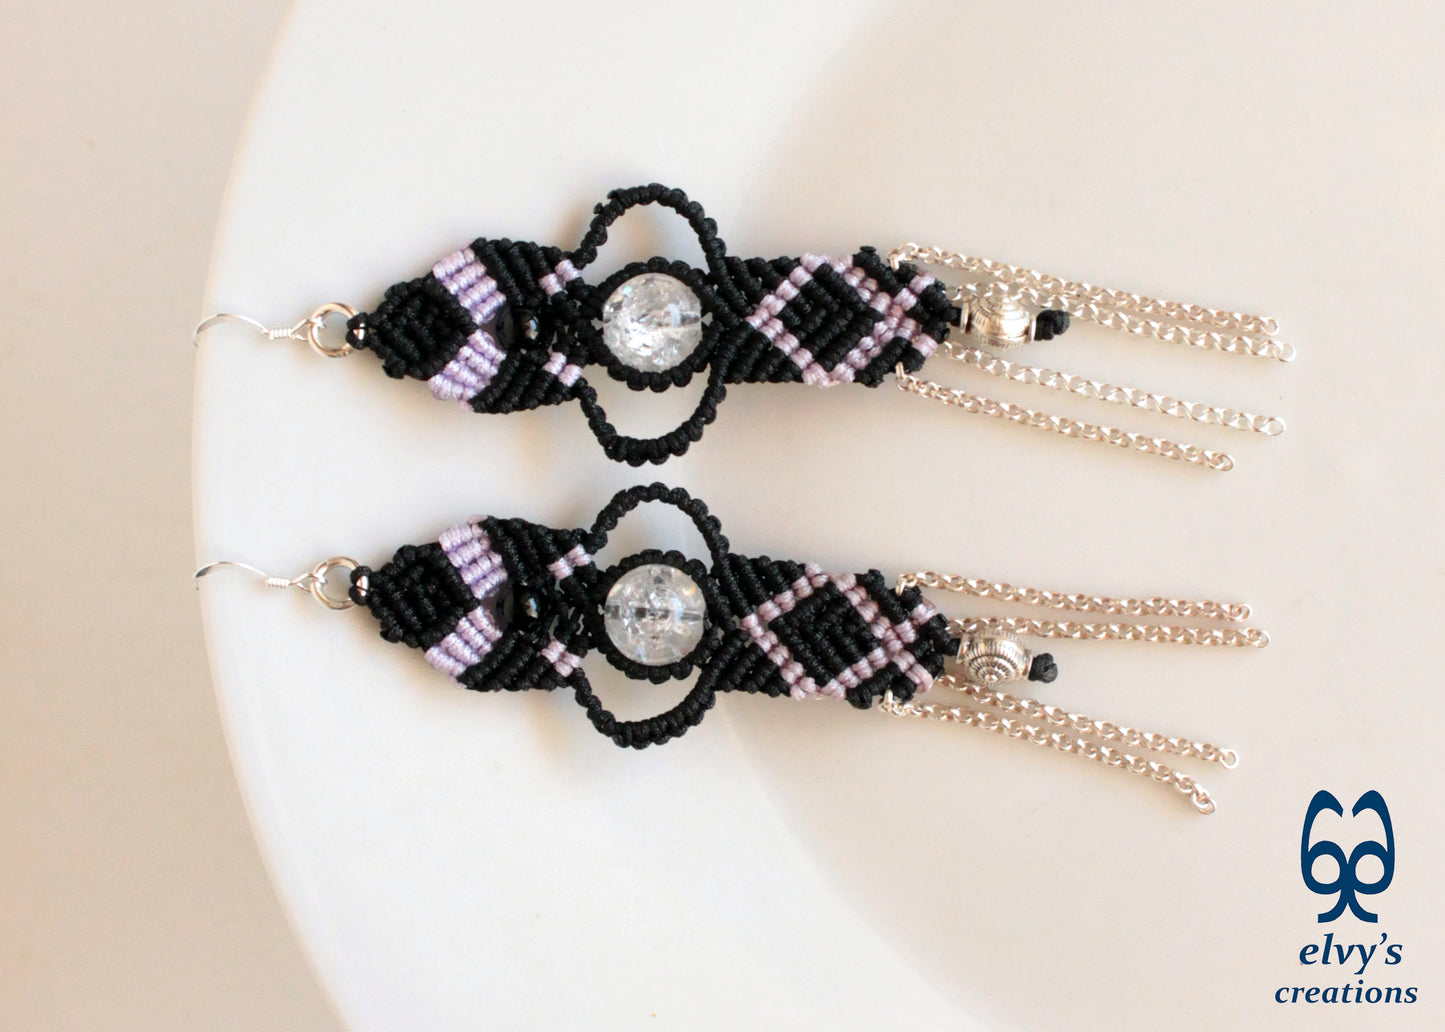 Black and Violet Purple Macrame Earrings with Onyx and Quartz Crystal Sterling Silver Chains Gift For Her